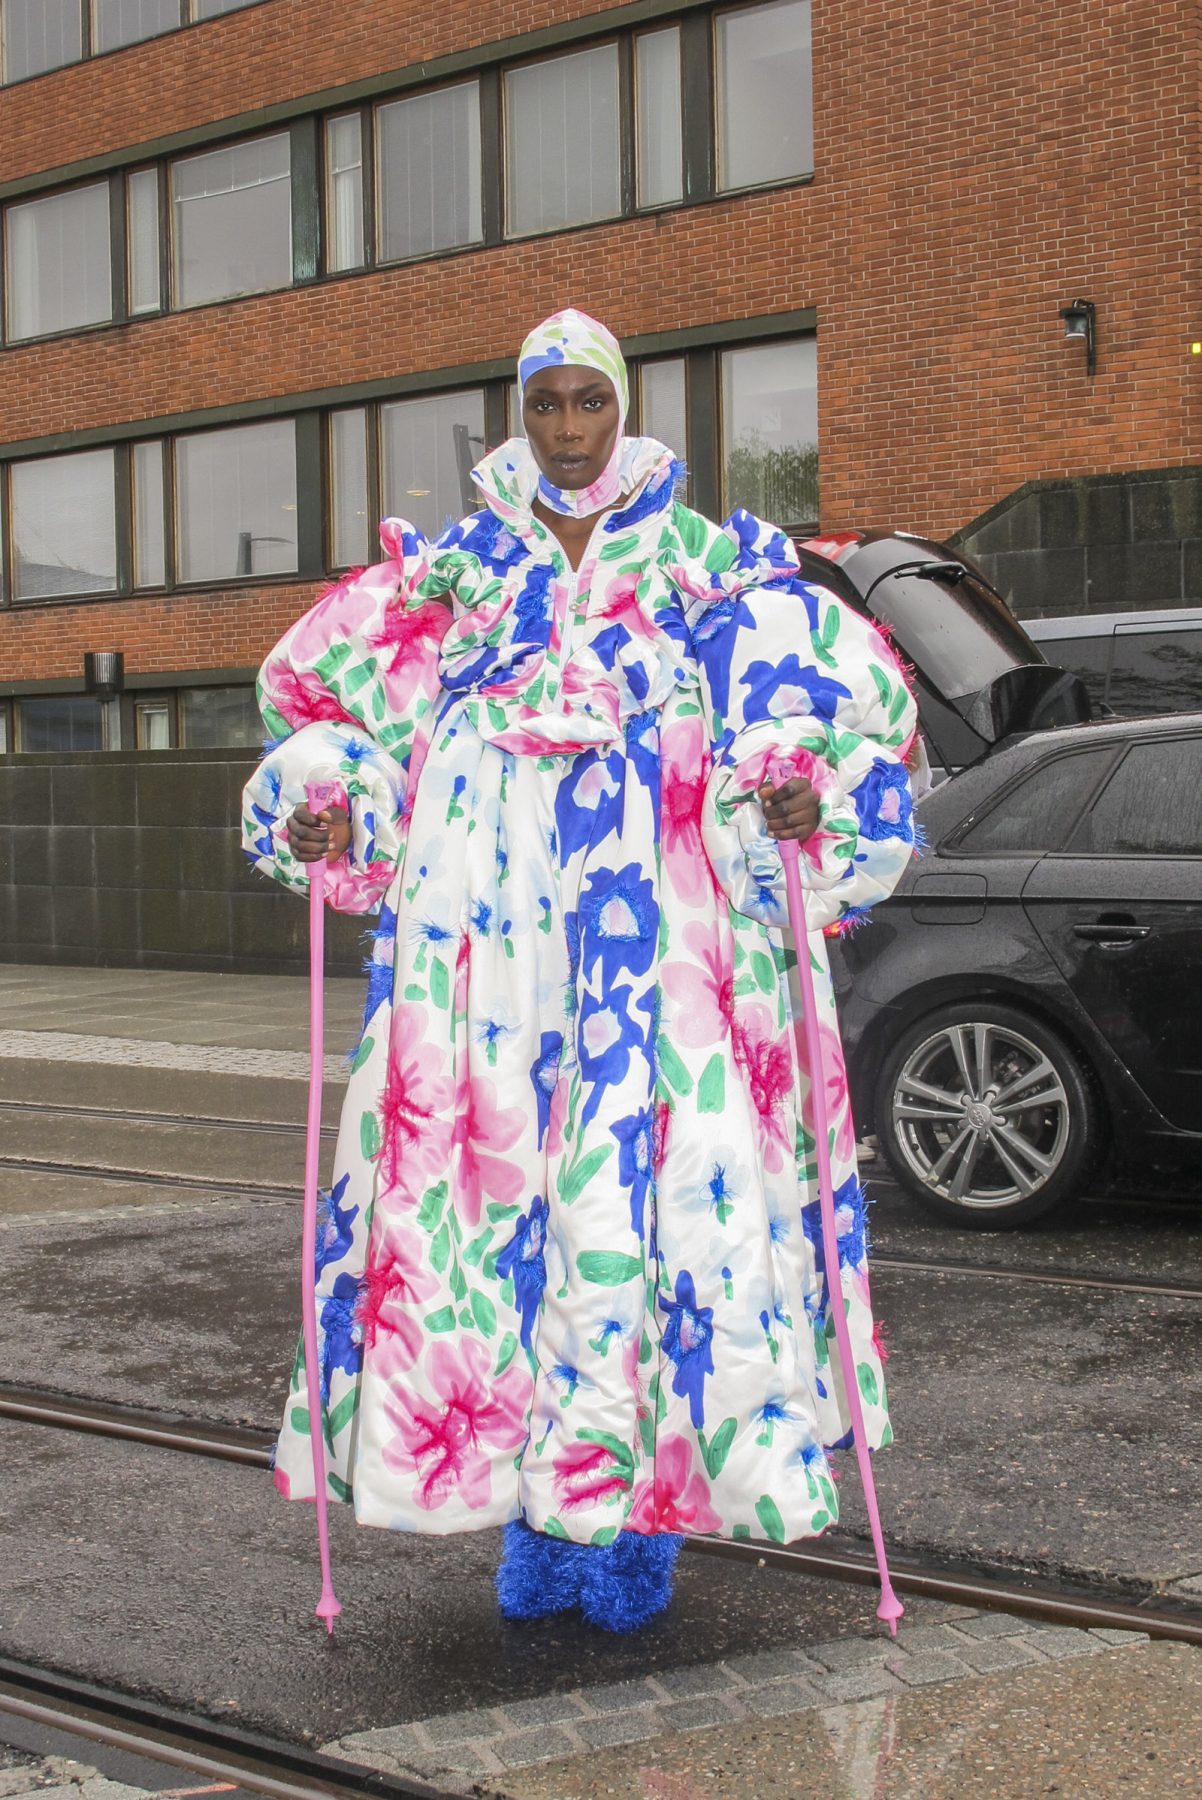 Model wearing a huge puffy dress with puffy sleeves and extensive flower print. Pink alpine skiing poles as accessories